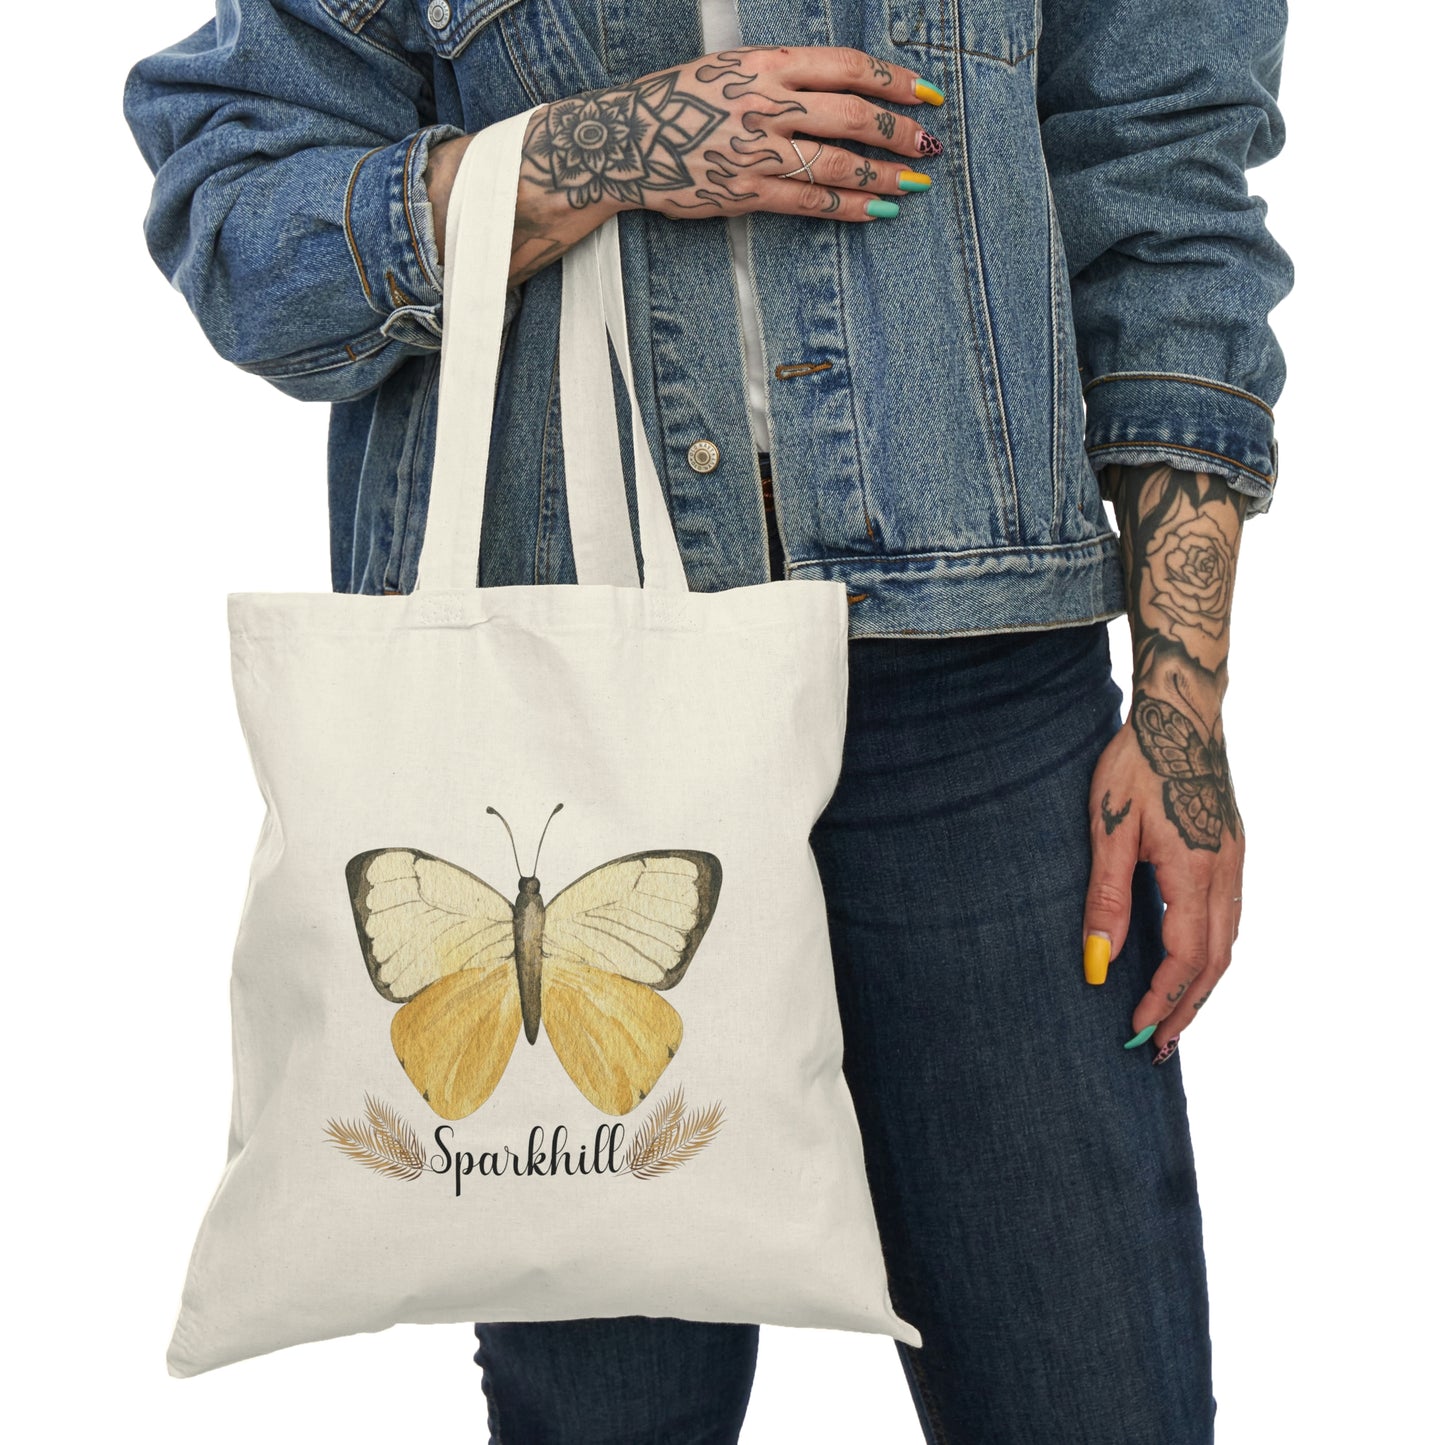 Butterfly Sparkhill Tote